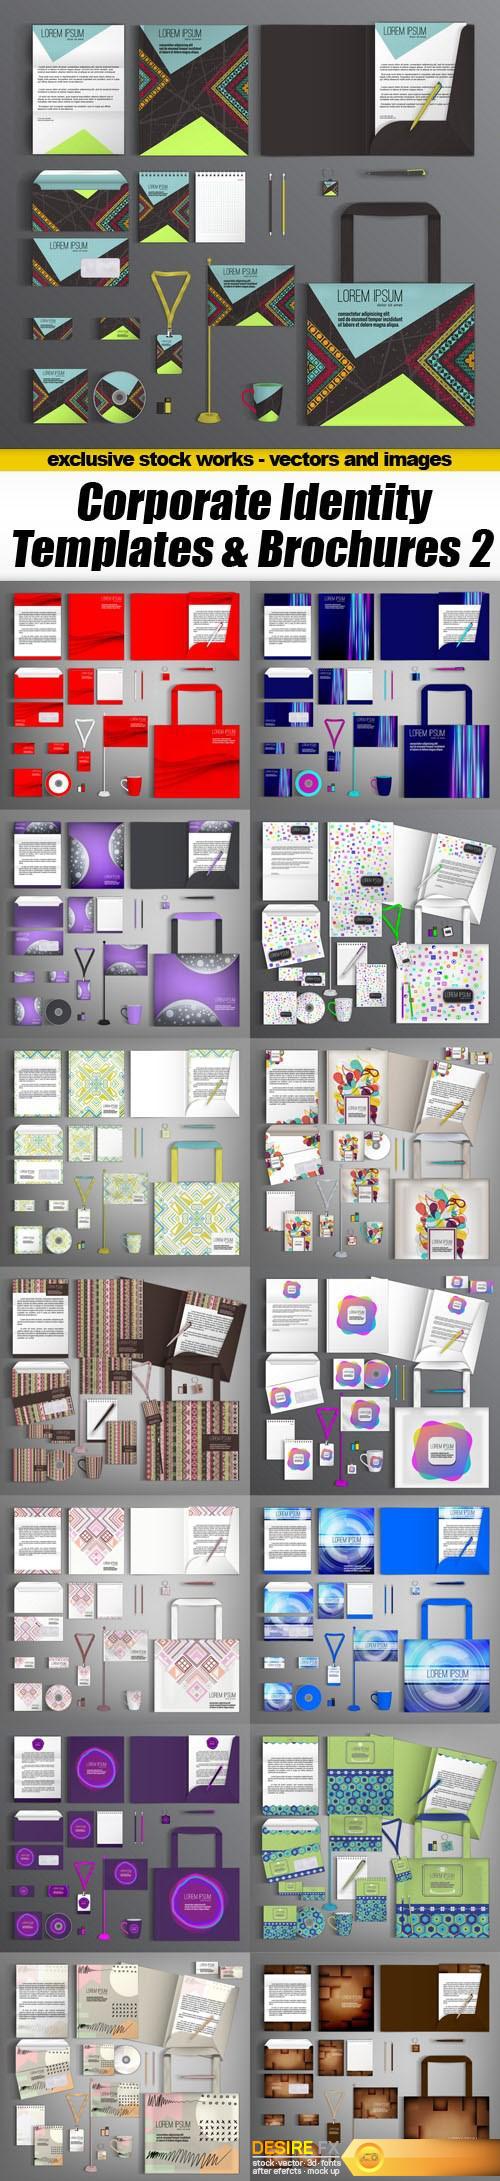 Corporate Identity Templates & Brochures 2 - 15xEPS